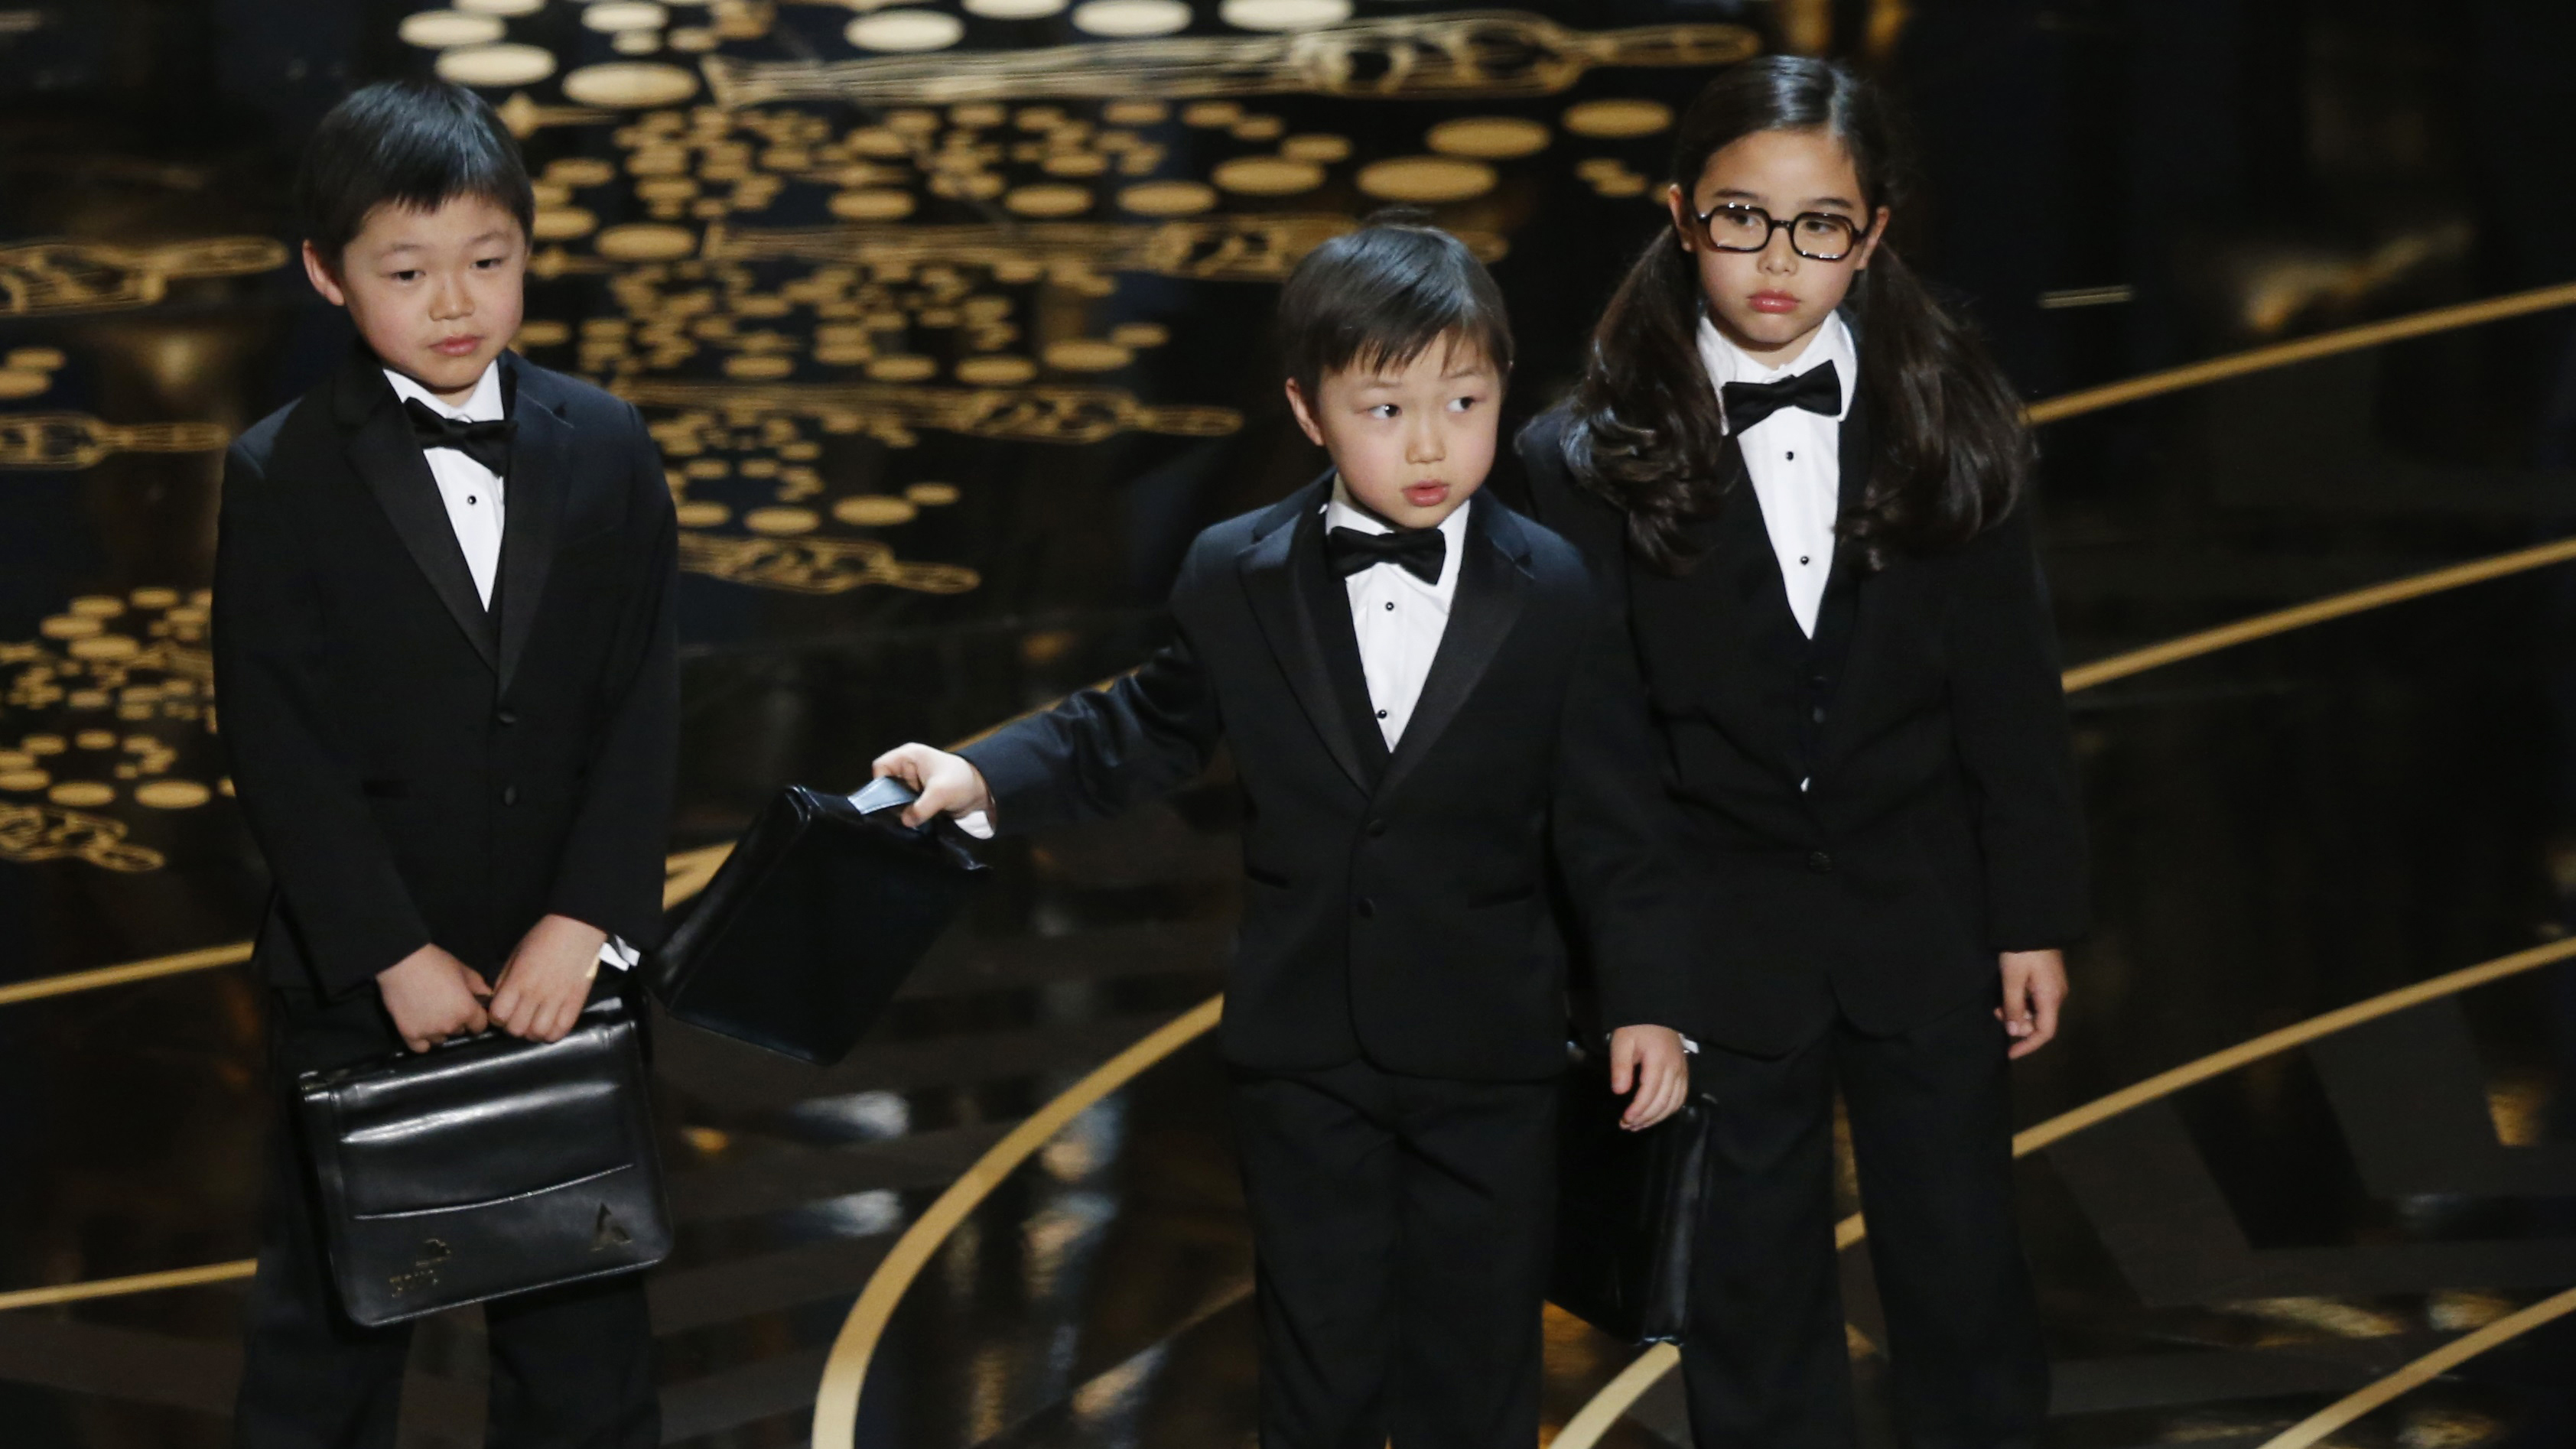 Chris Rock making a joke about Asian accountants at the Oscars